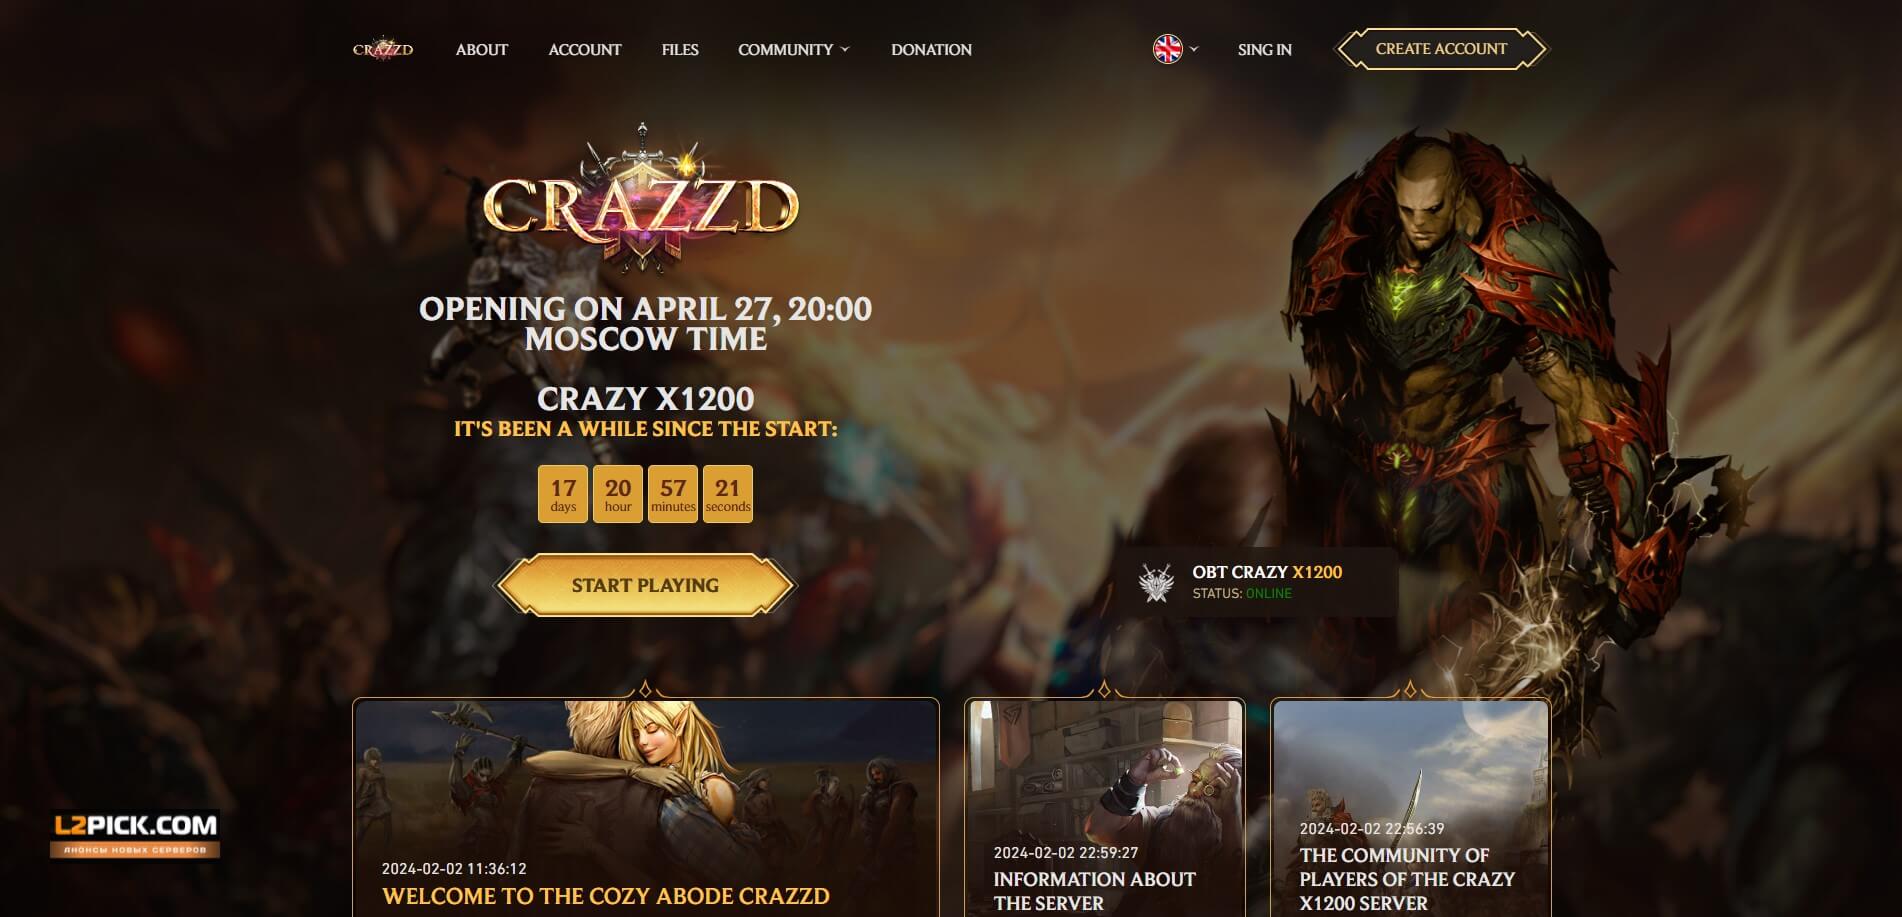 💥🔥 Welcome to Lineage 2 Interlude server with x1200 rates on crazzd.com! Ready for intense battles? 🔥💥